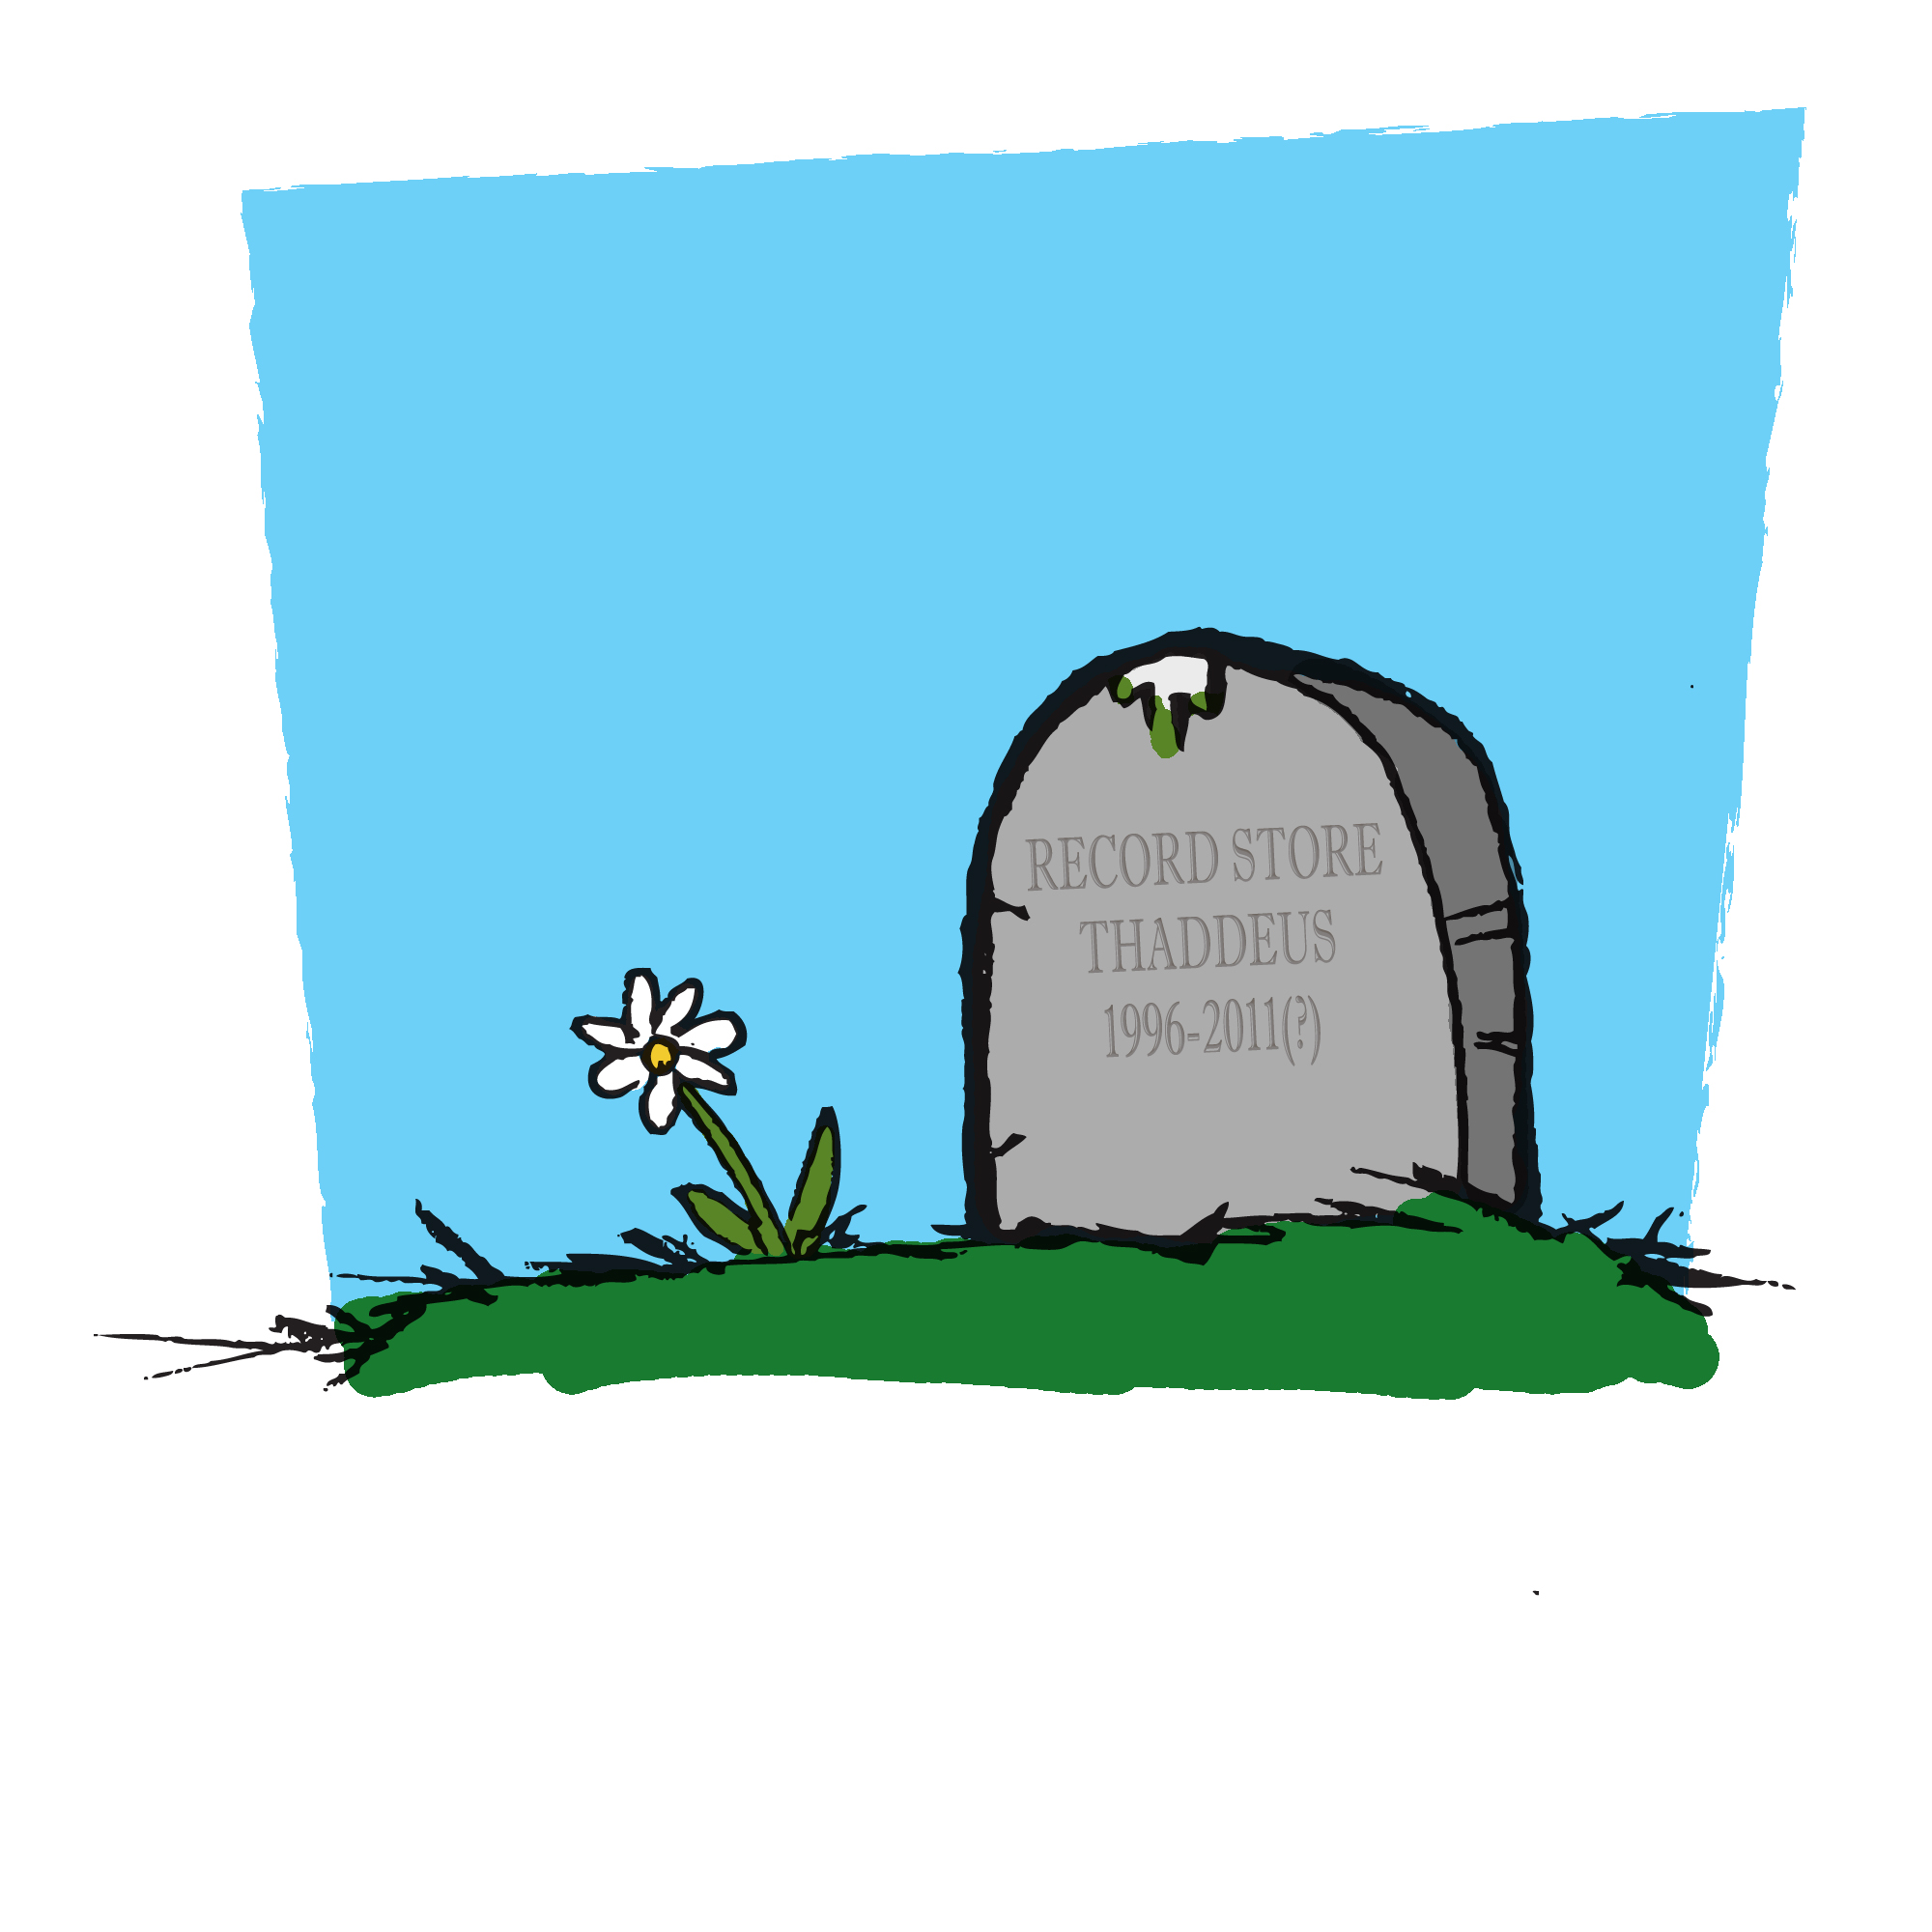 Cartoon Tombstone Images : Gravestone Clipart Animated Pictures On ...